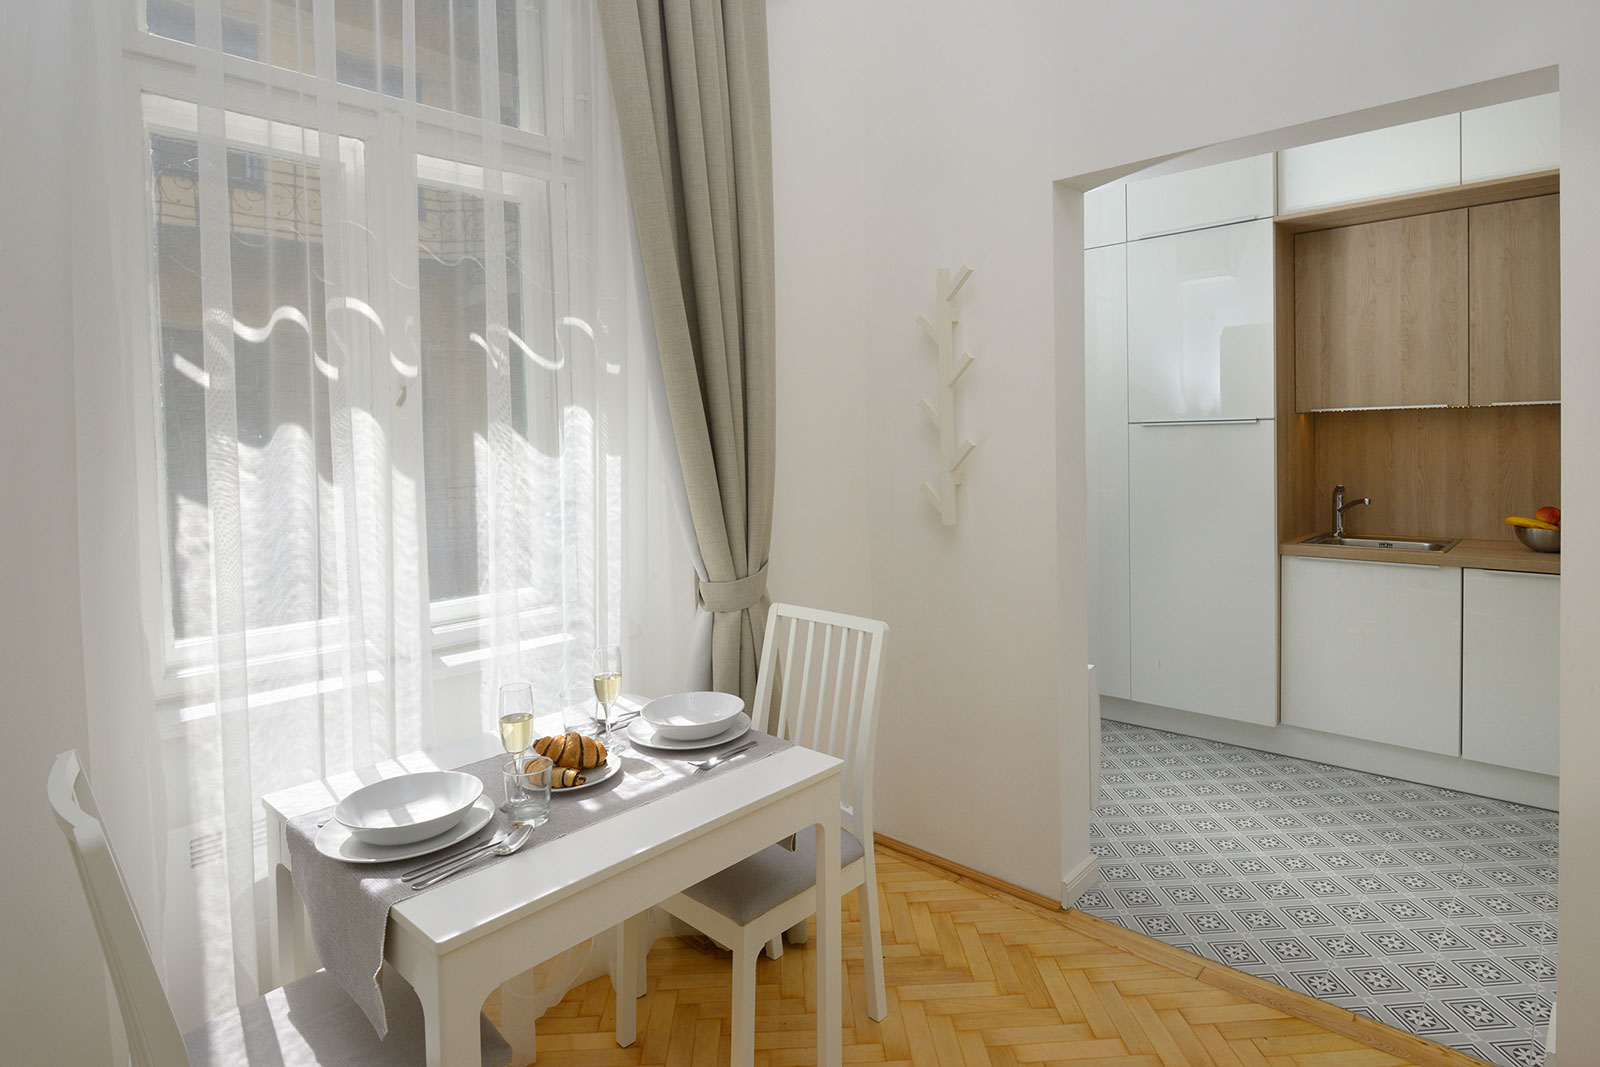 Budapest Property Rentals Apartments - Welcome